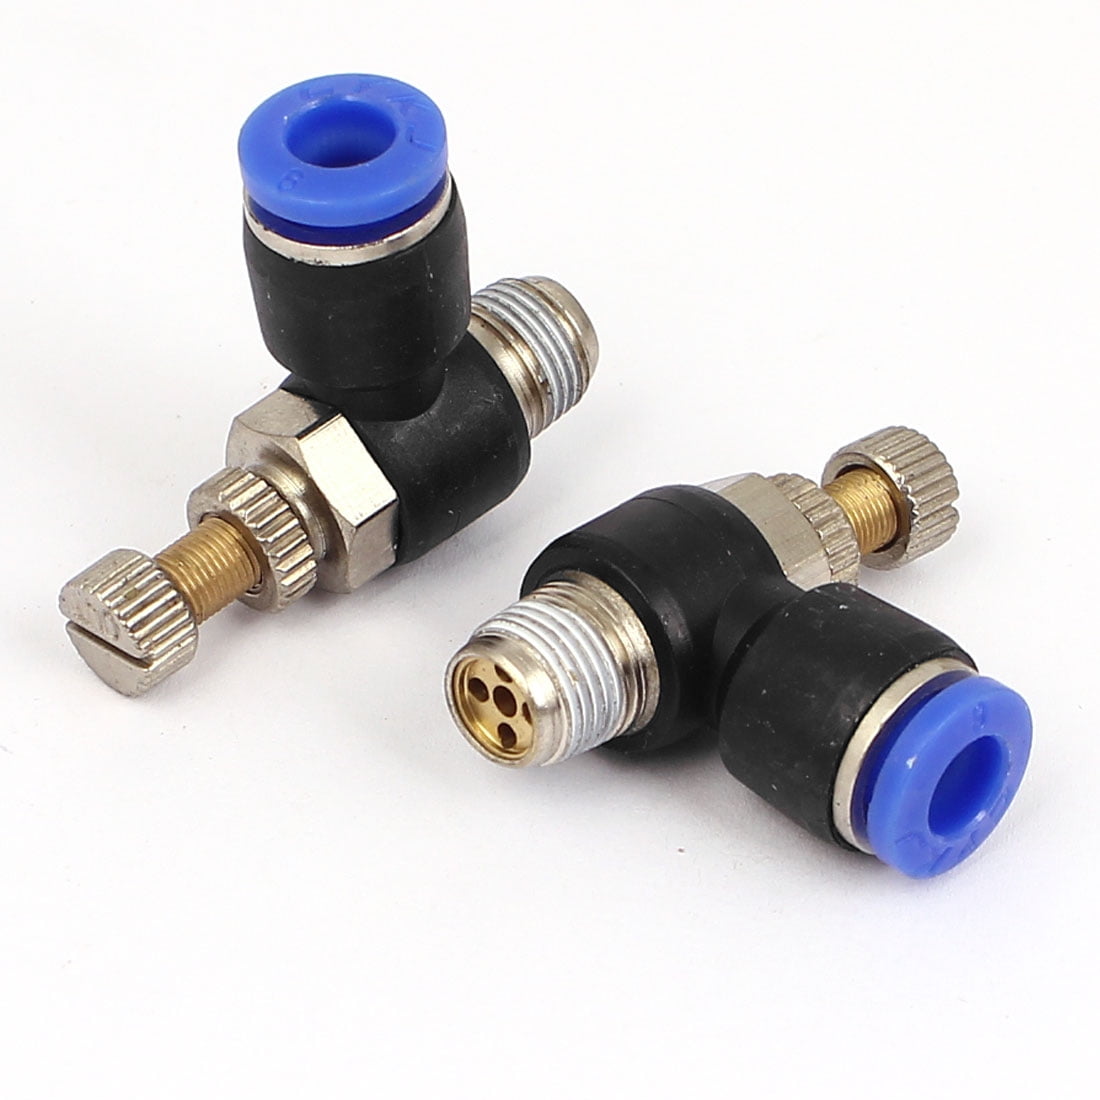 13mm Male Thread 6mm Tube Push In Fitting Speed Flow Controller Air Valve 